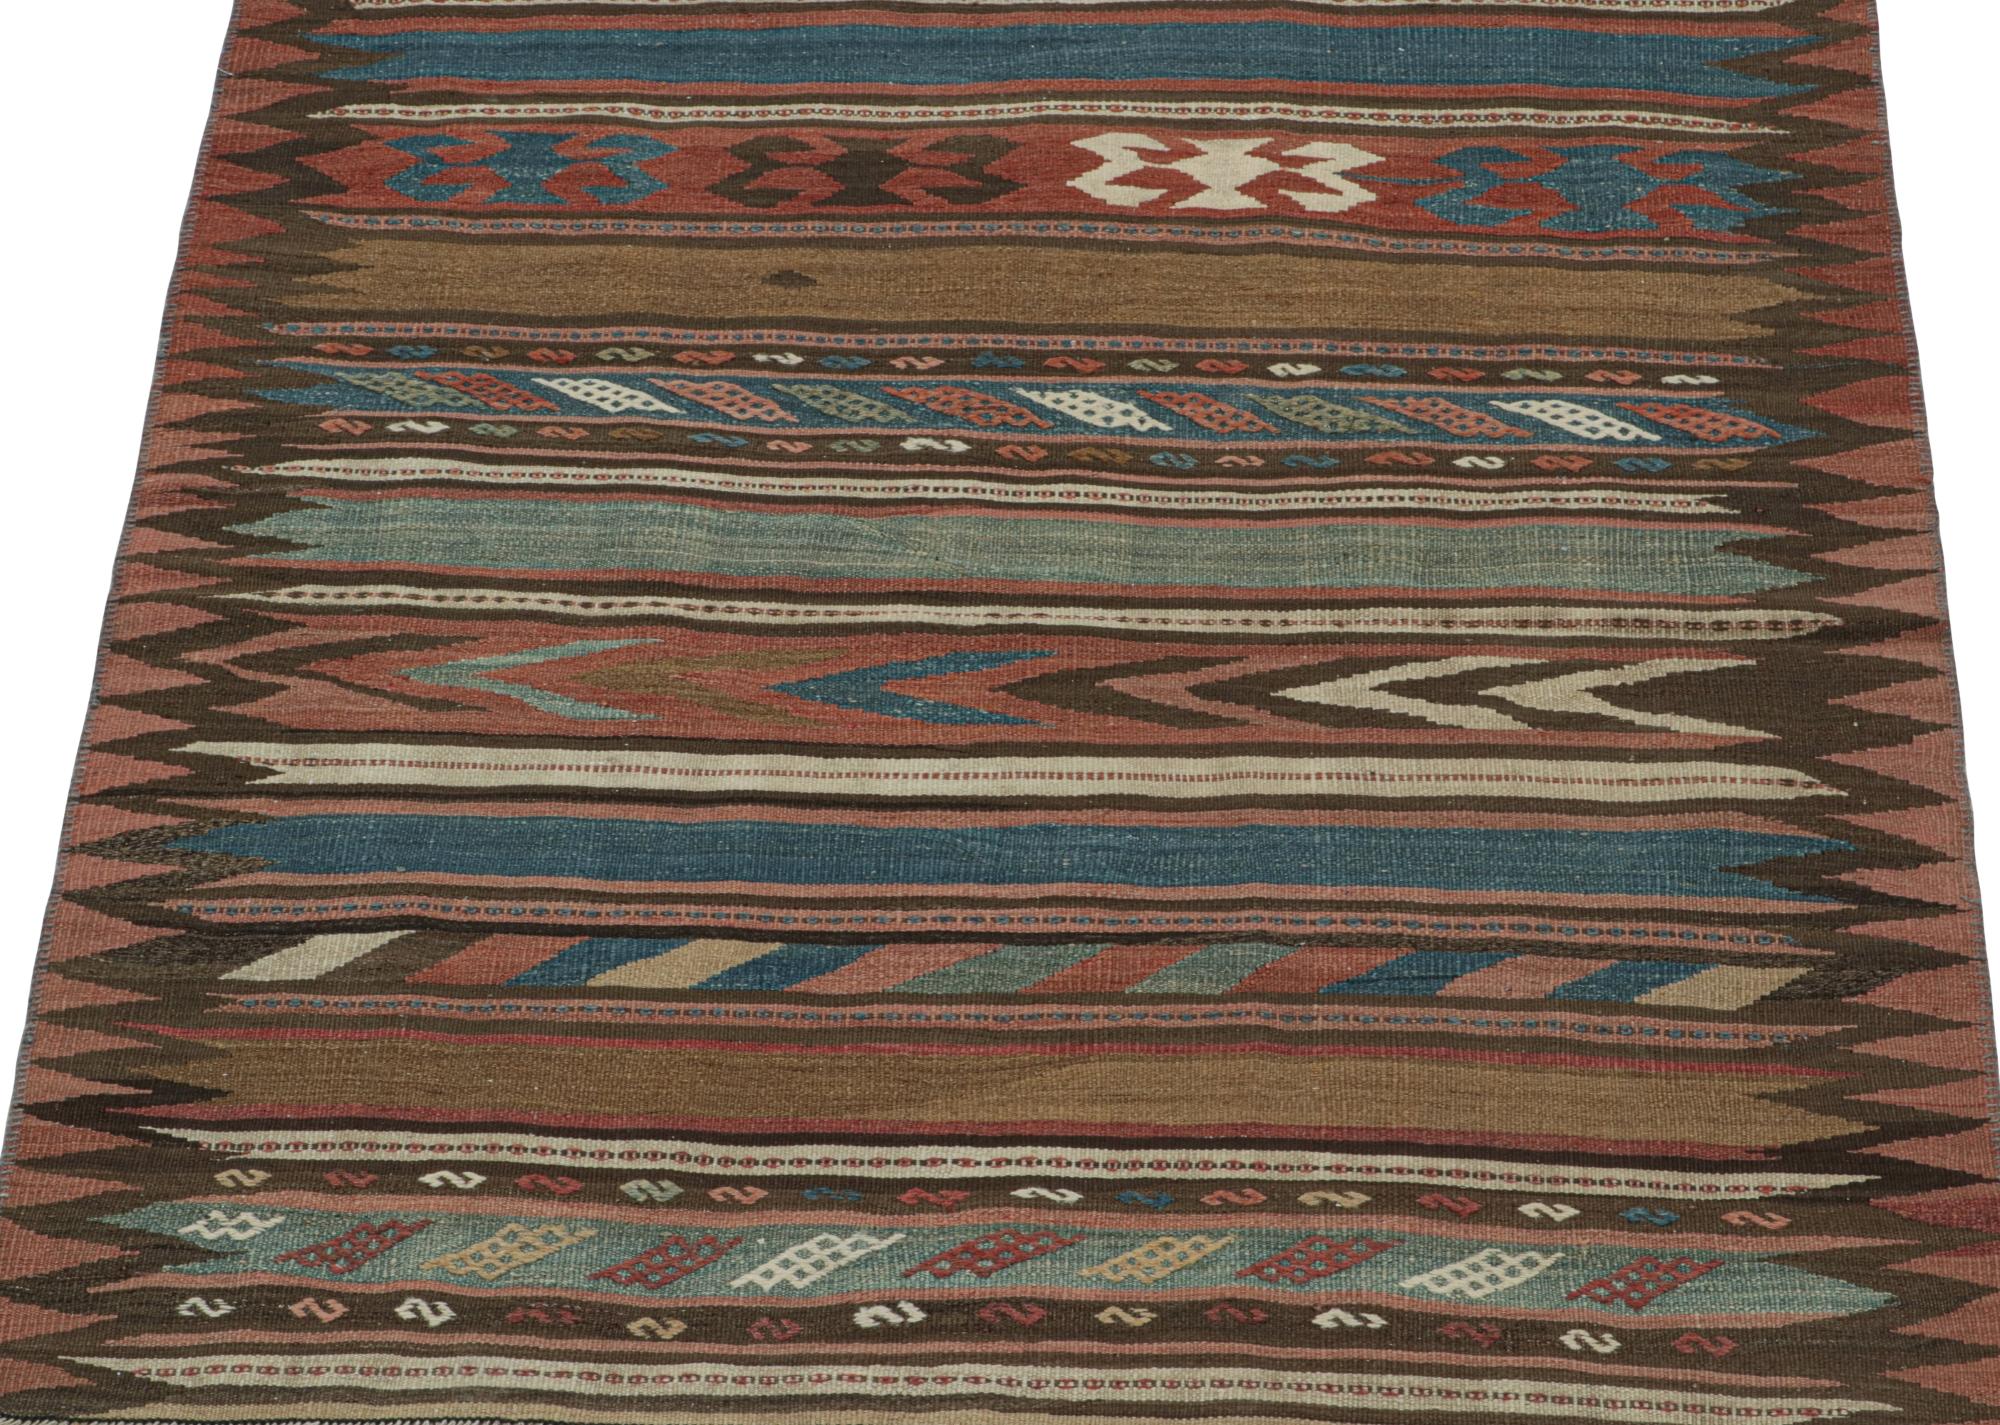 Vintage Bidjar Persian Kilim with Stripes & Geometric Patterns In Good Condition For Sale In Long Island City, NY